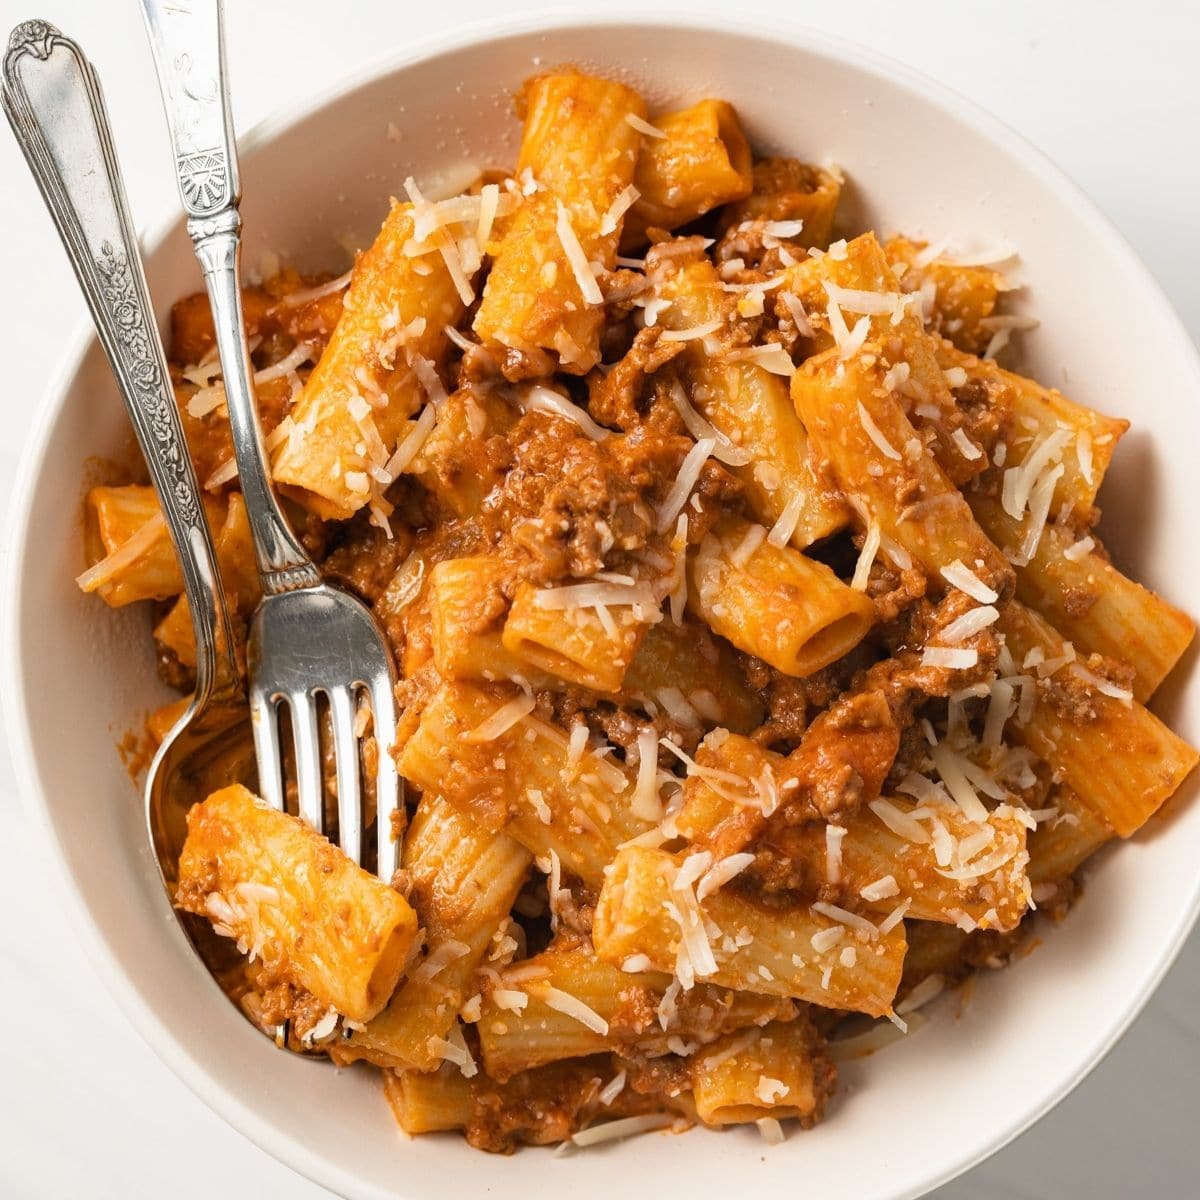 Bolognese Meat Sauce